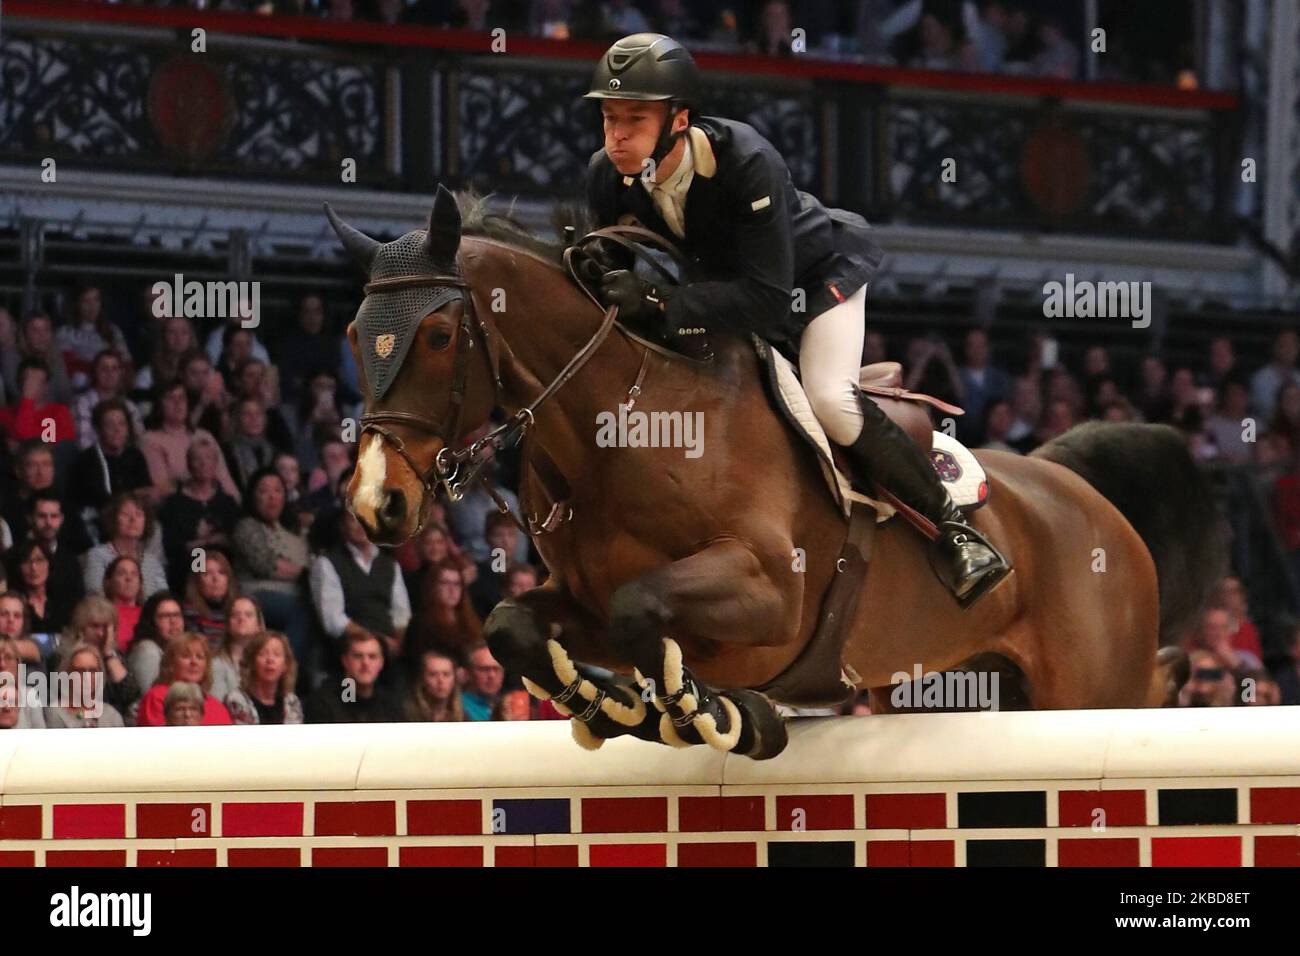 William Whitaker riding RMF Charly during the Cayenne Puissance Event at the International Horse Show at Olympia, London on Wednesday 18th December 2019. (Photo by Jon Bromley/MI News/NurPhoto) Stock Photo